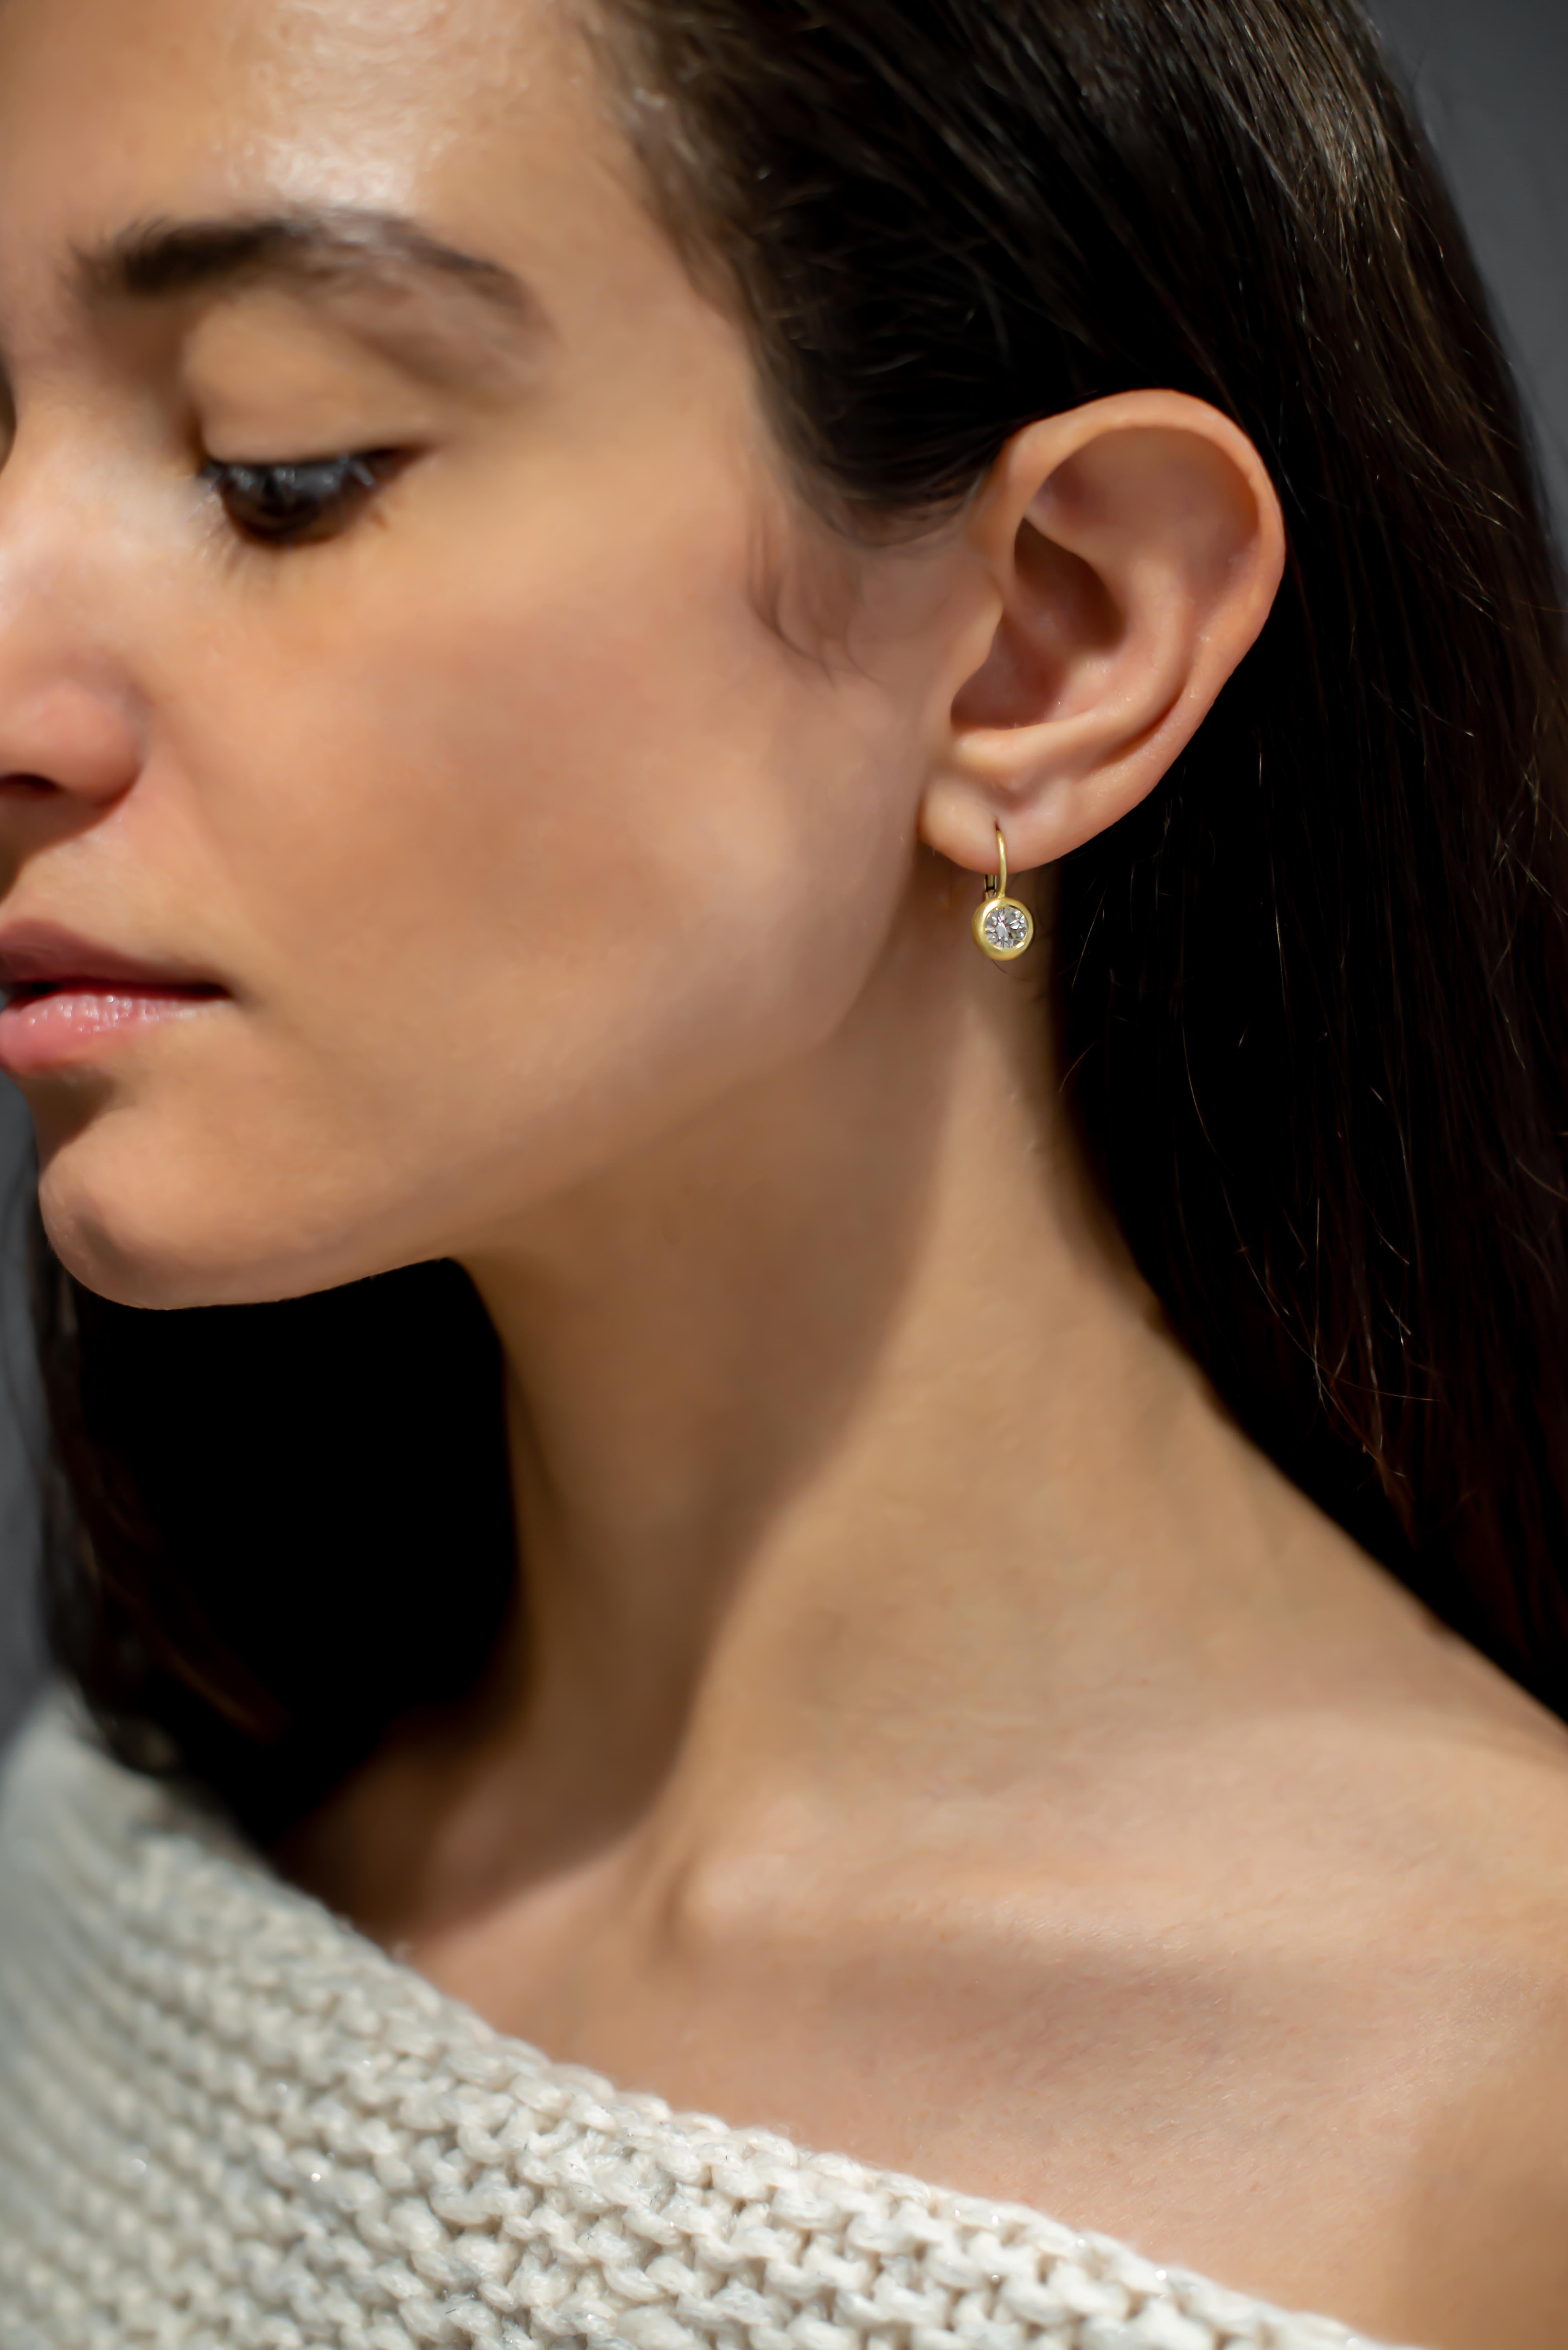 The ultimate beauty in simplicity!
White, round brilliant cut diamonds are set in 18k gold, domed bezels and finished with secure lever-backs. Earrings hang perfectly, just below the earlobe, providing a bit of sparkle with each movement. 

Diamond: